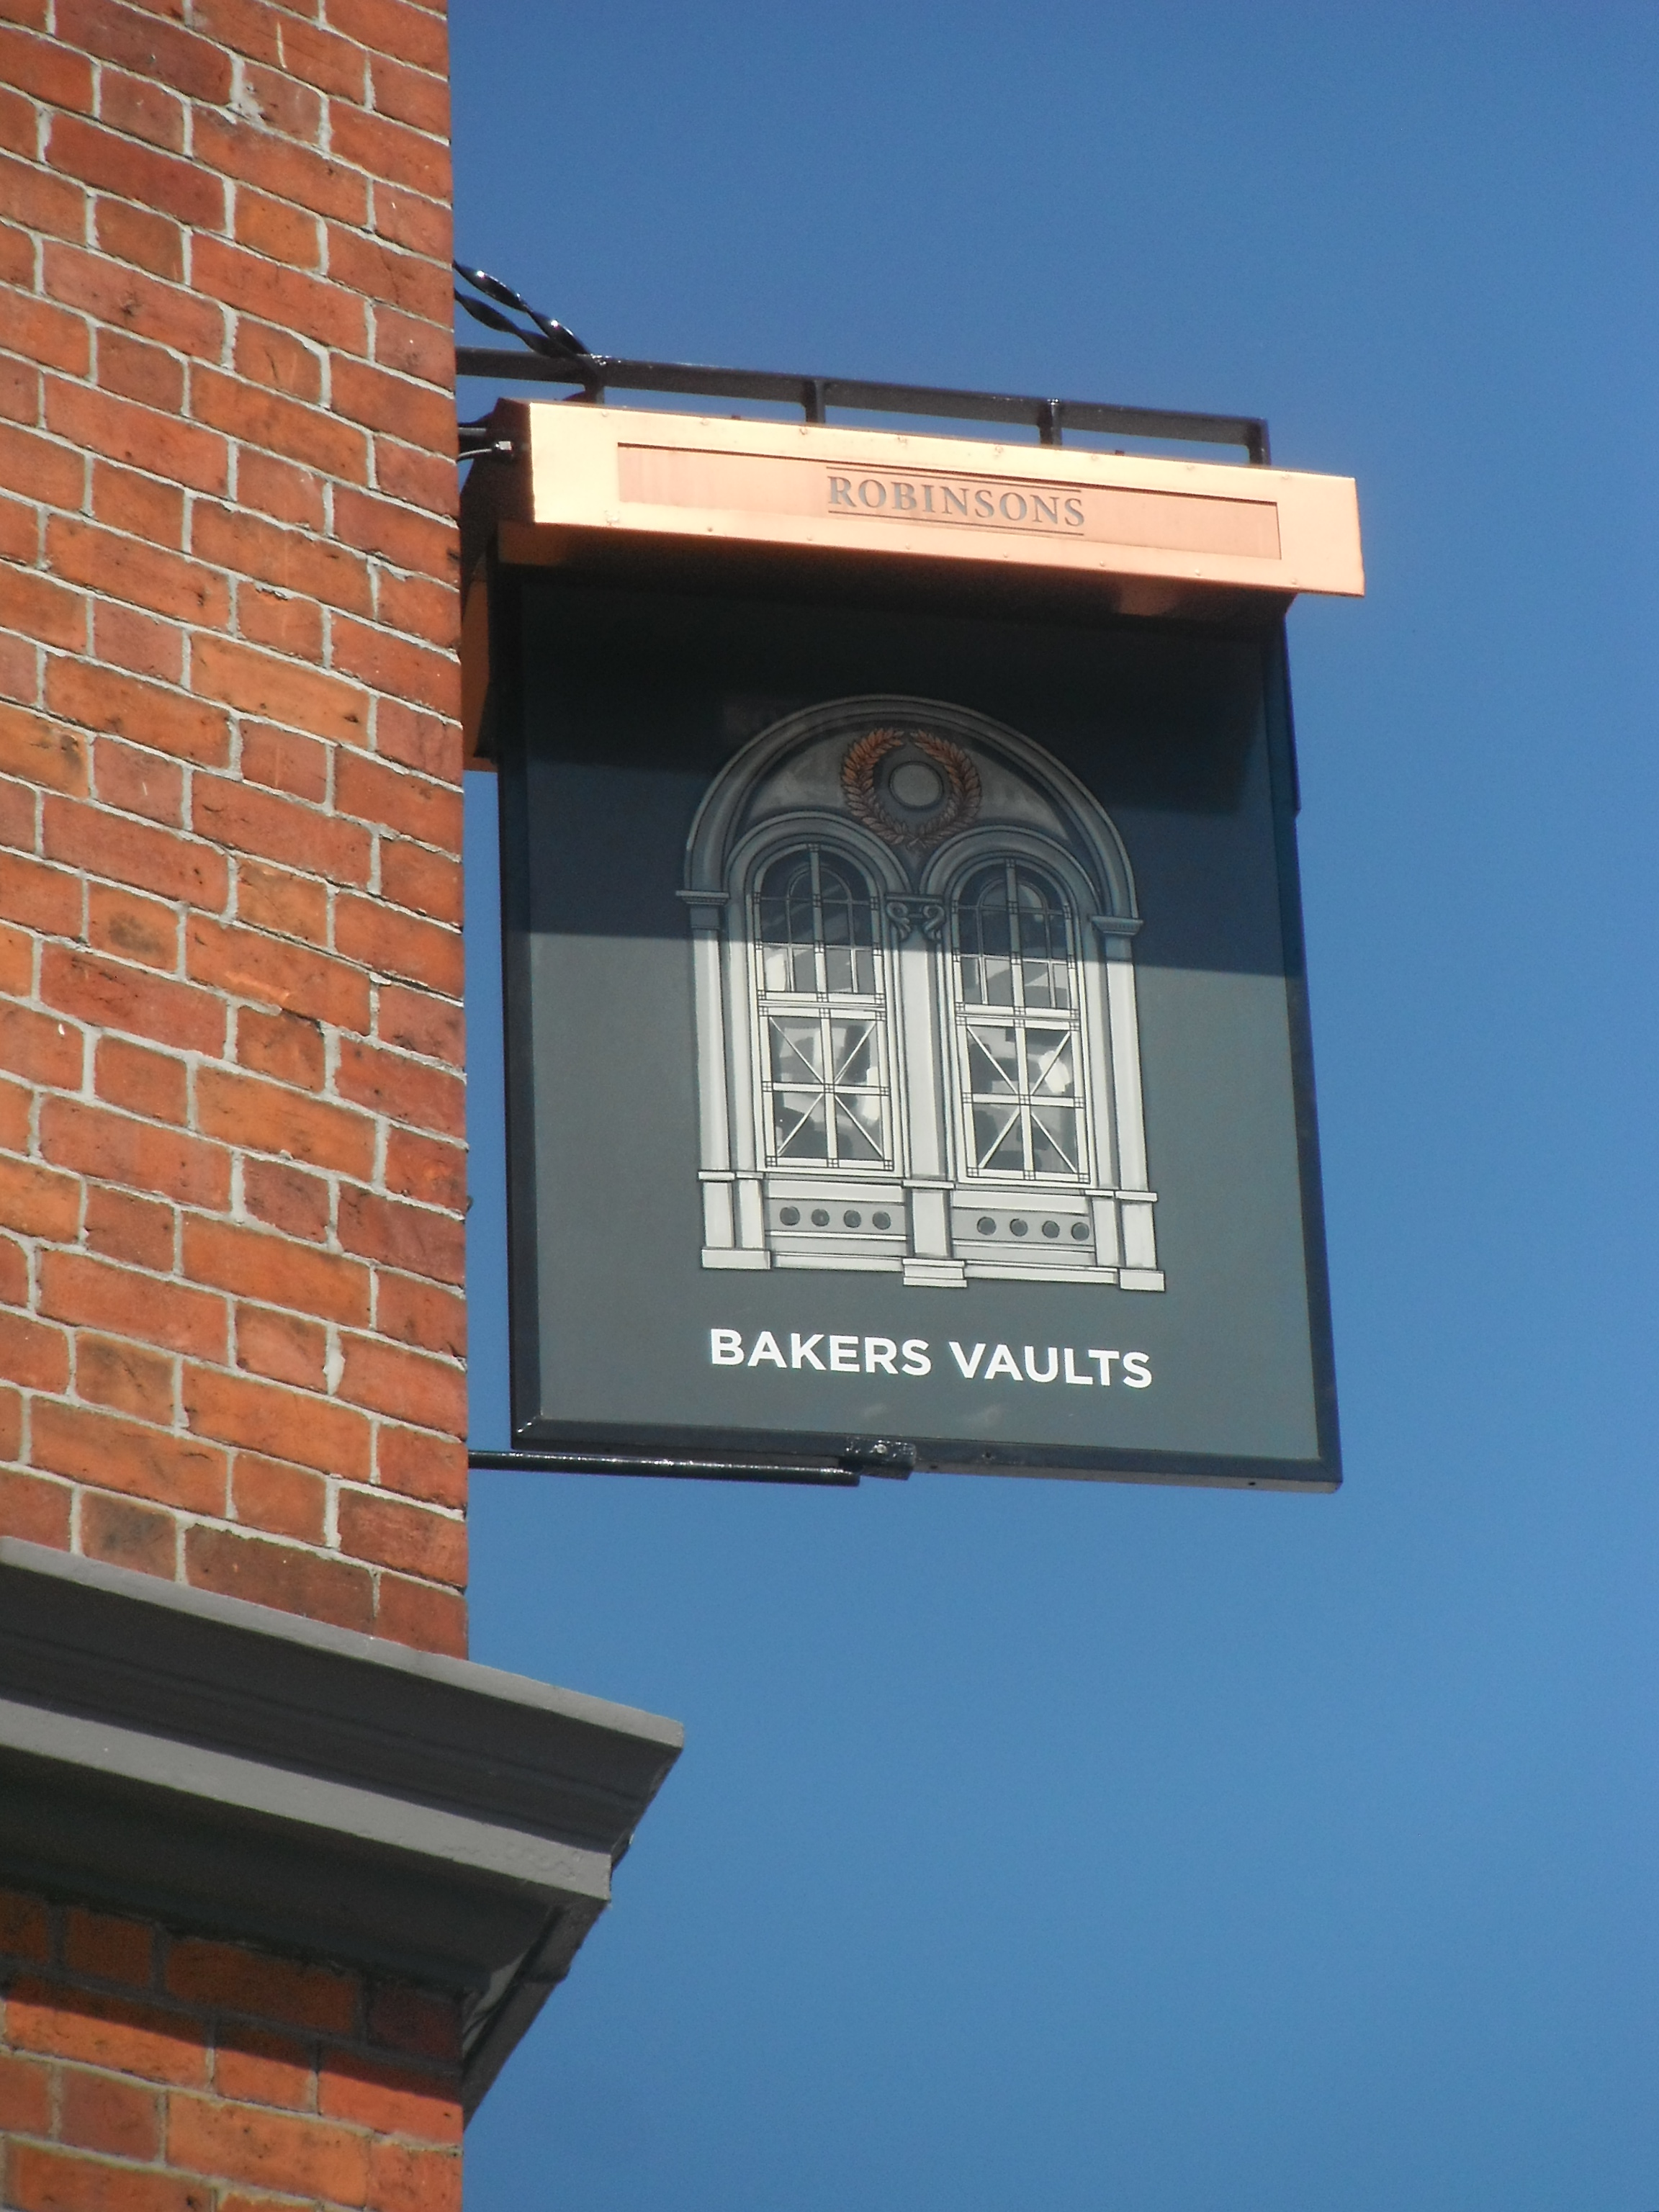 Photo taken by me - The Bakers vaults Pub - Stockport